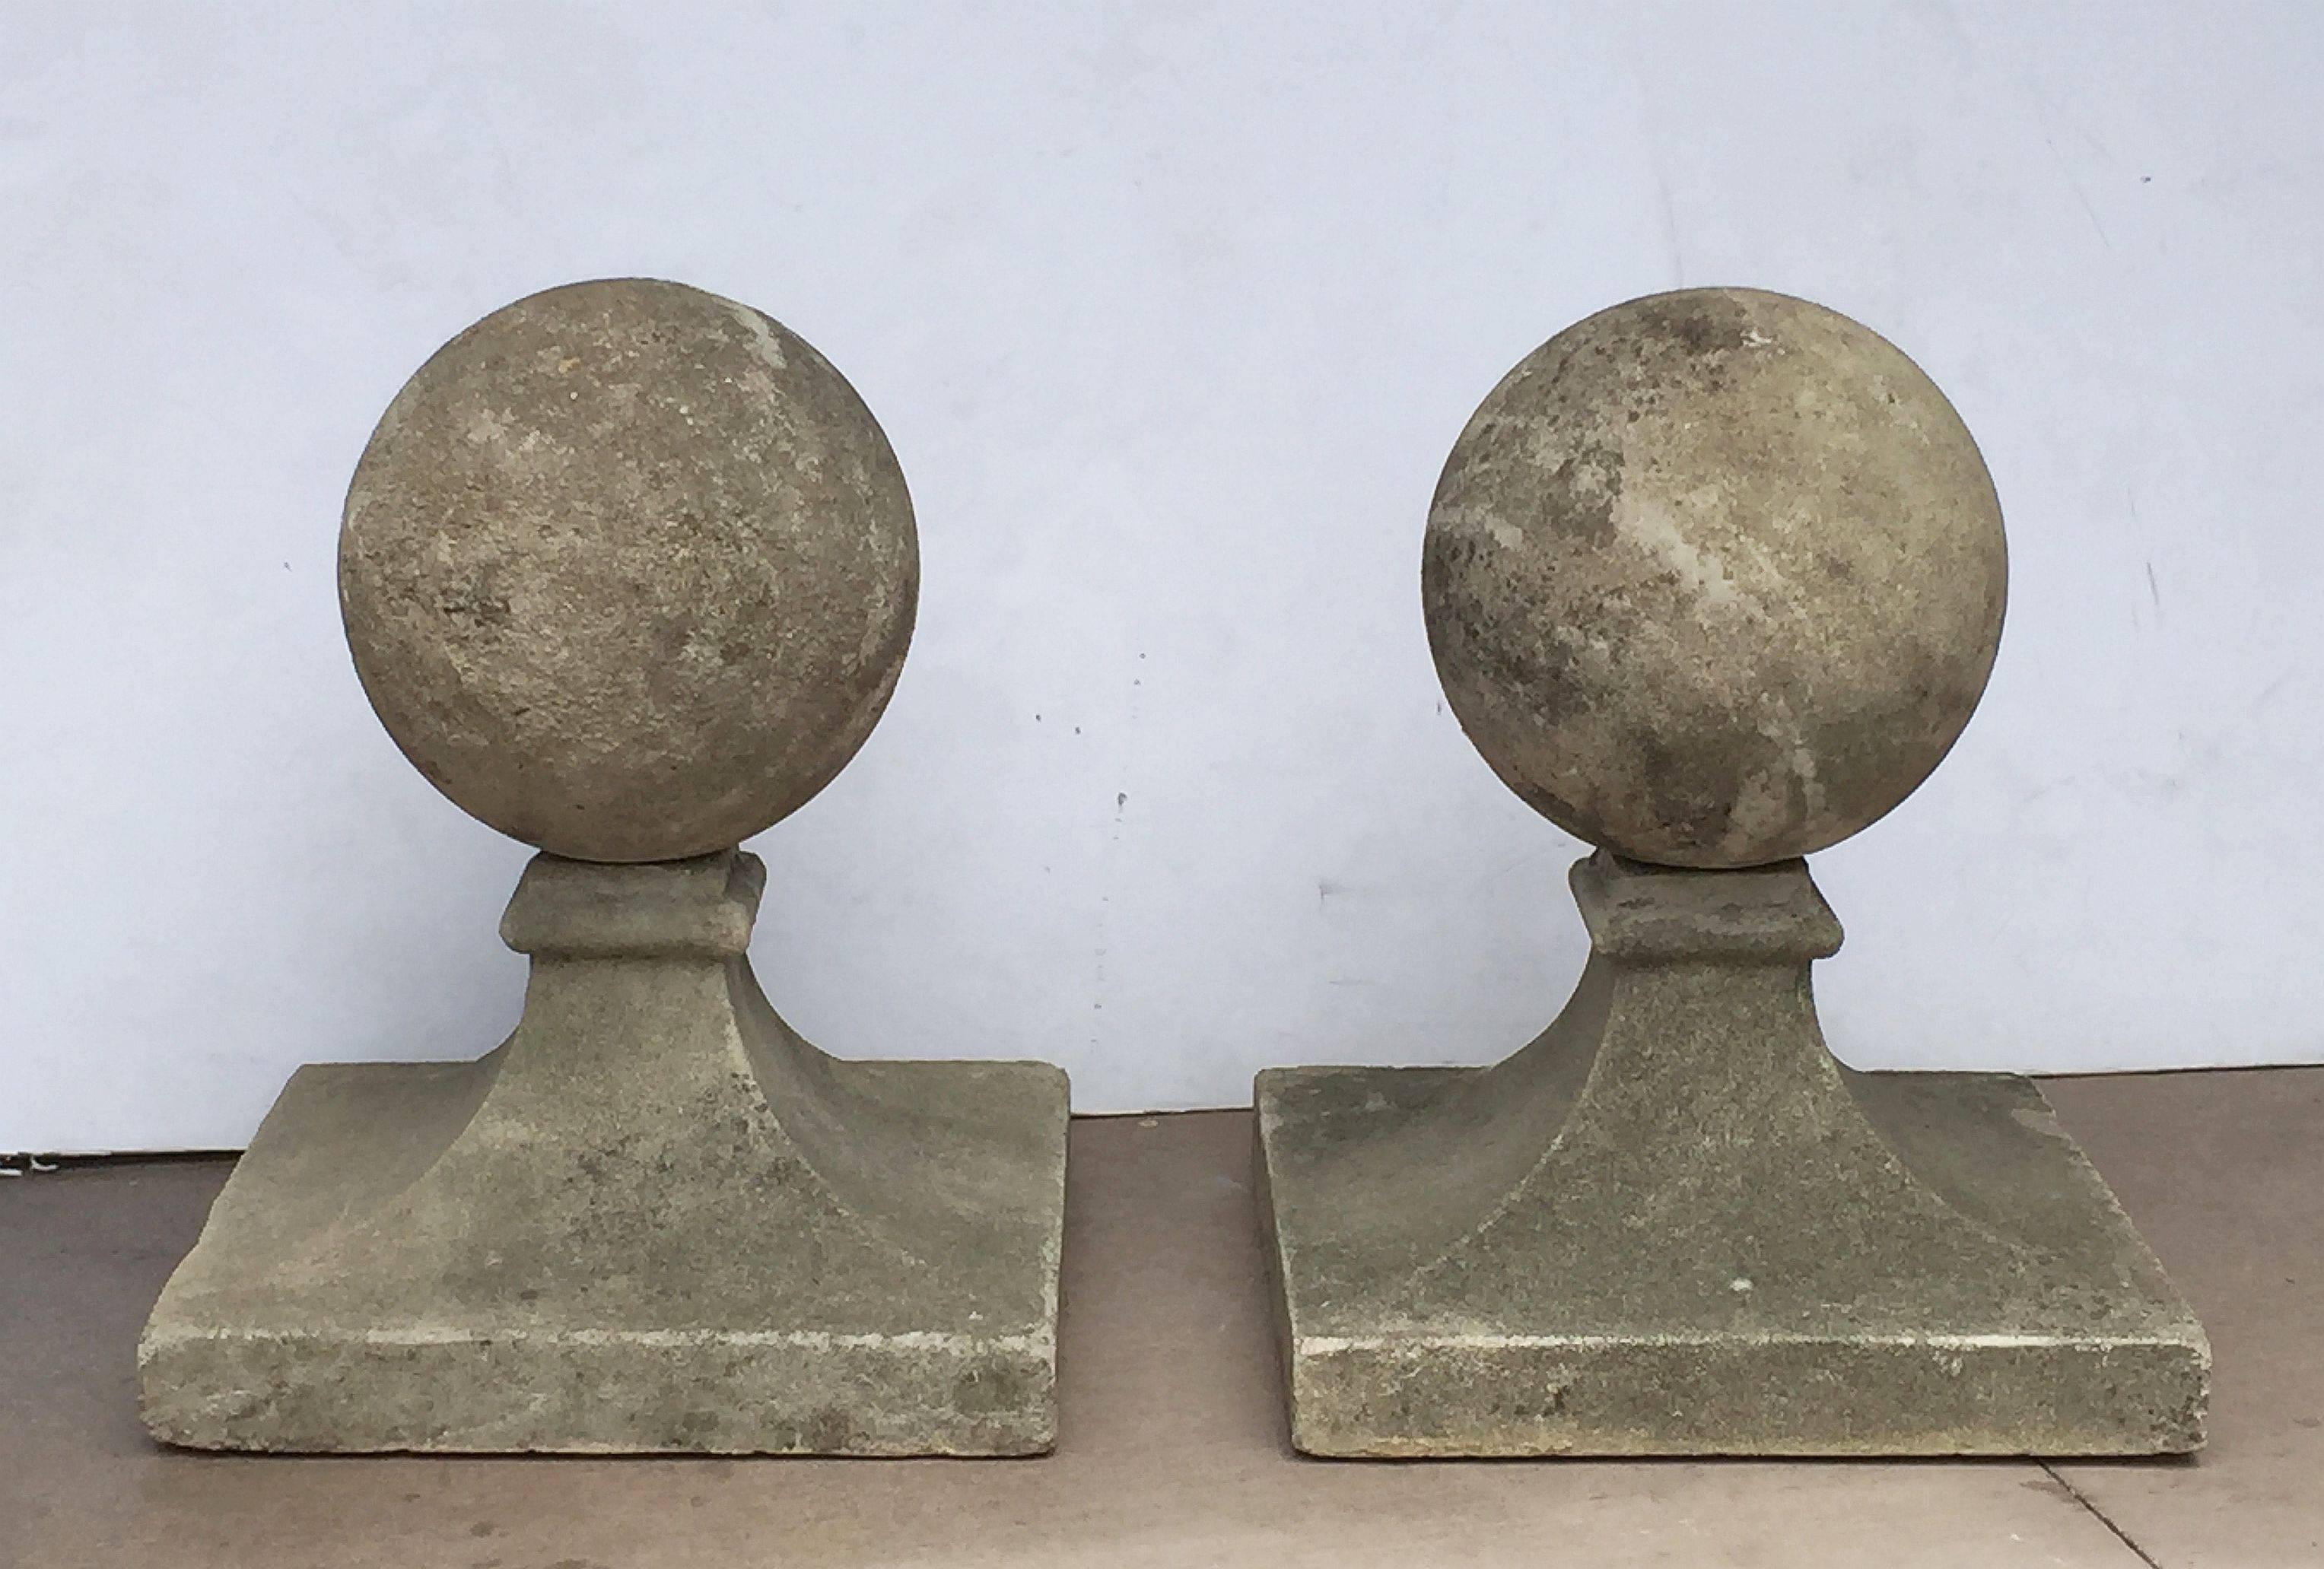 A fine pair of large English coping balls of composition stone, each ball set upon a square plinth base.

Dimensions are H 23